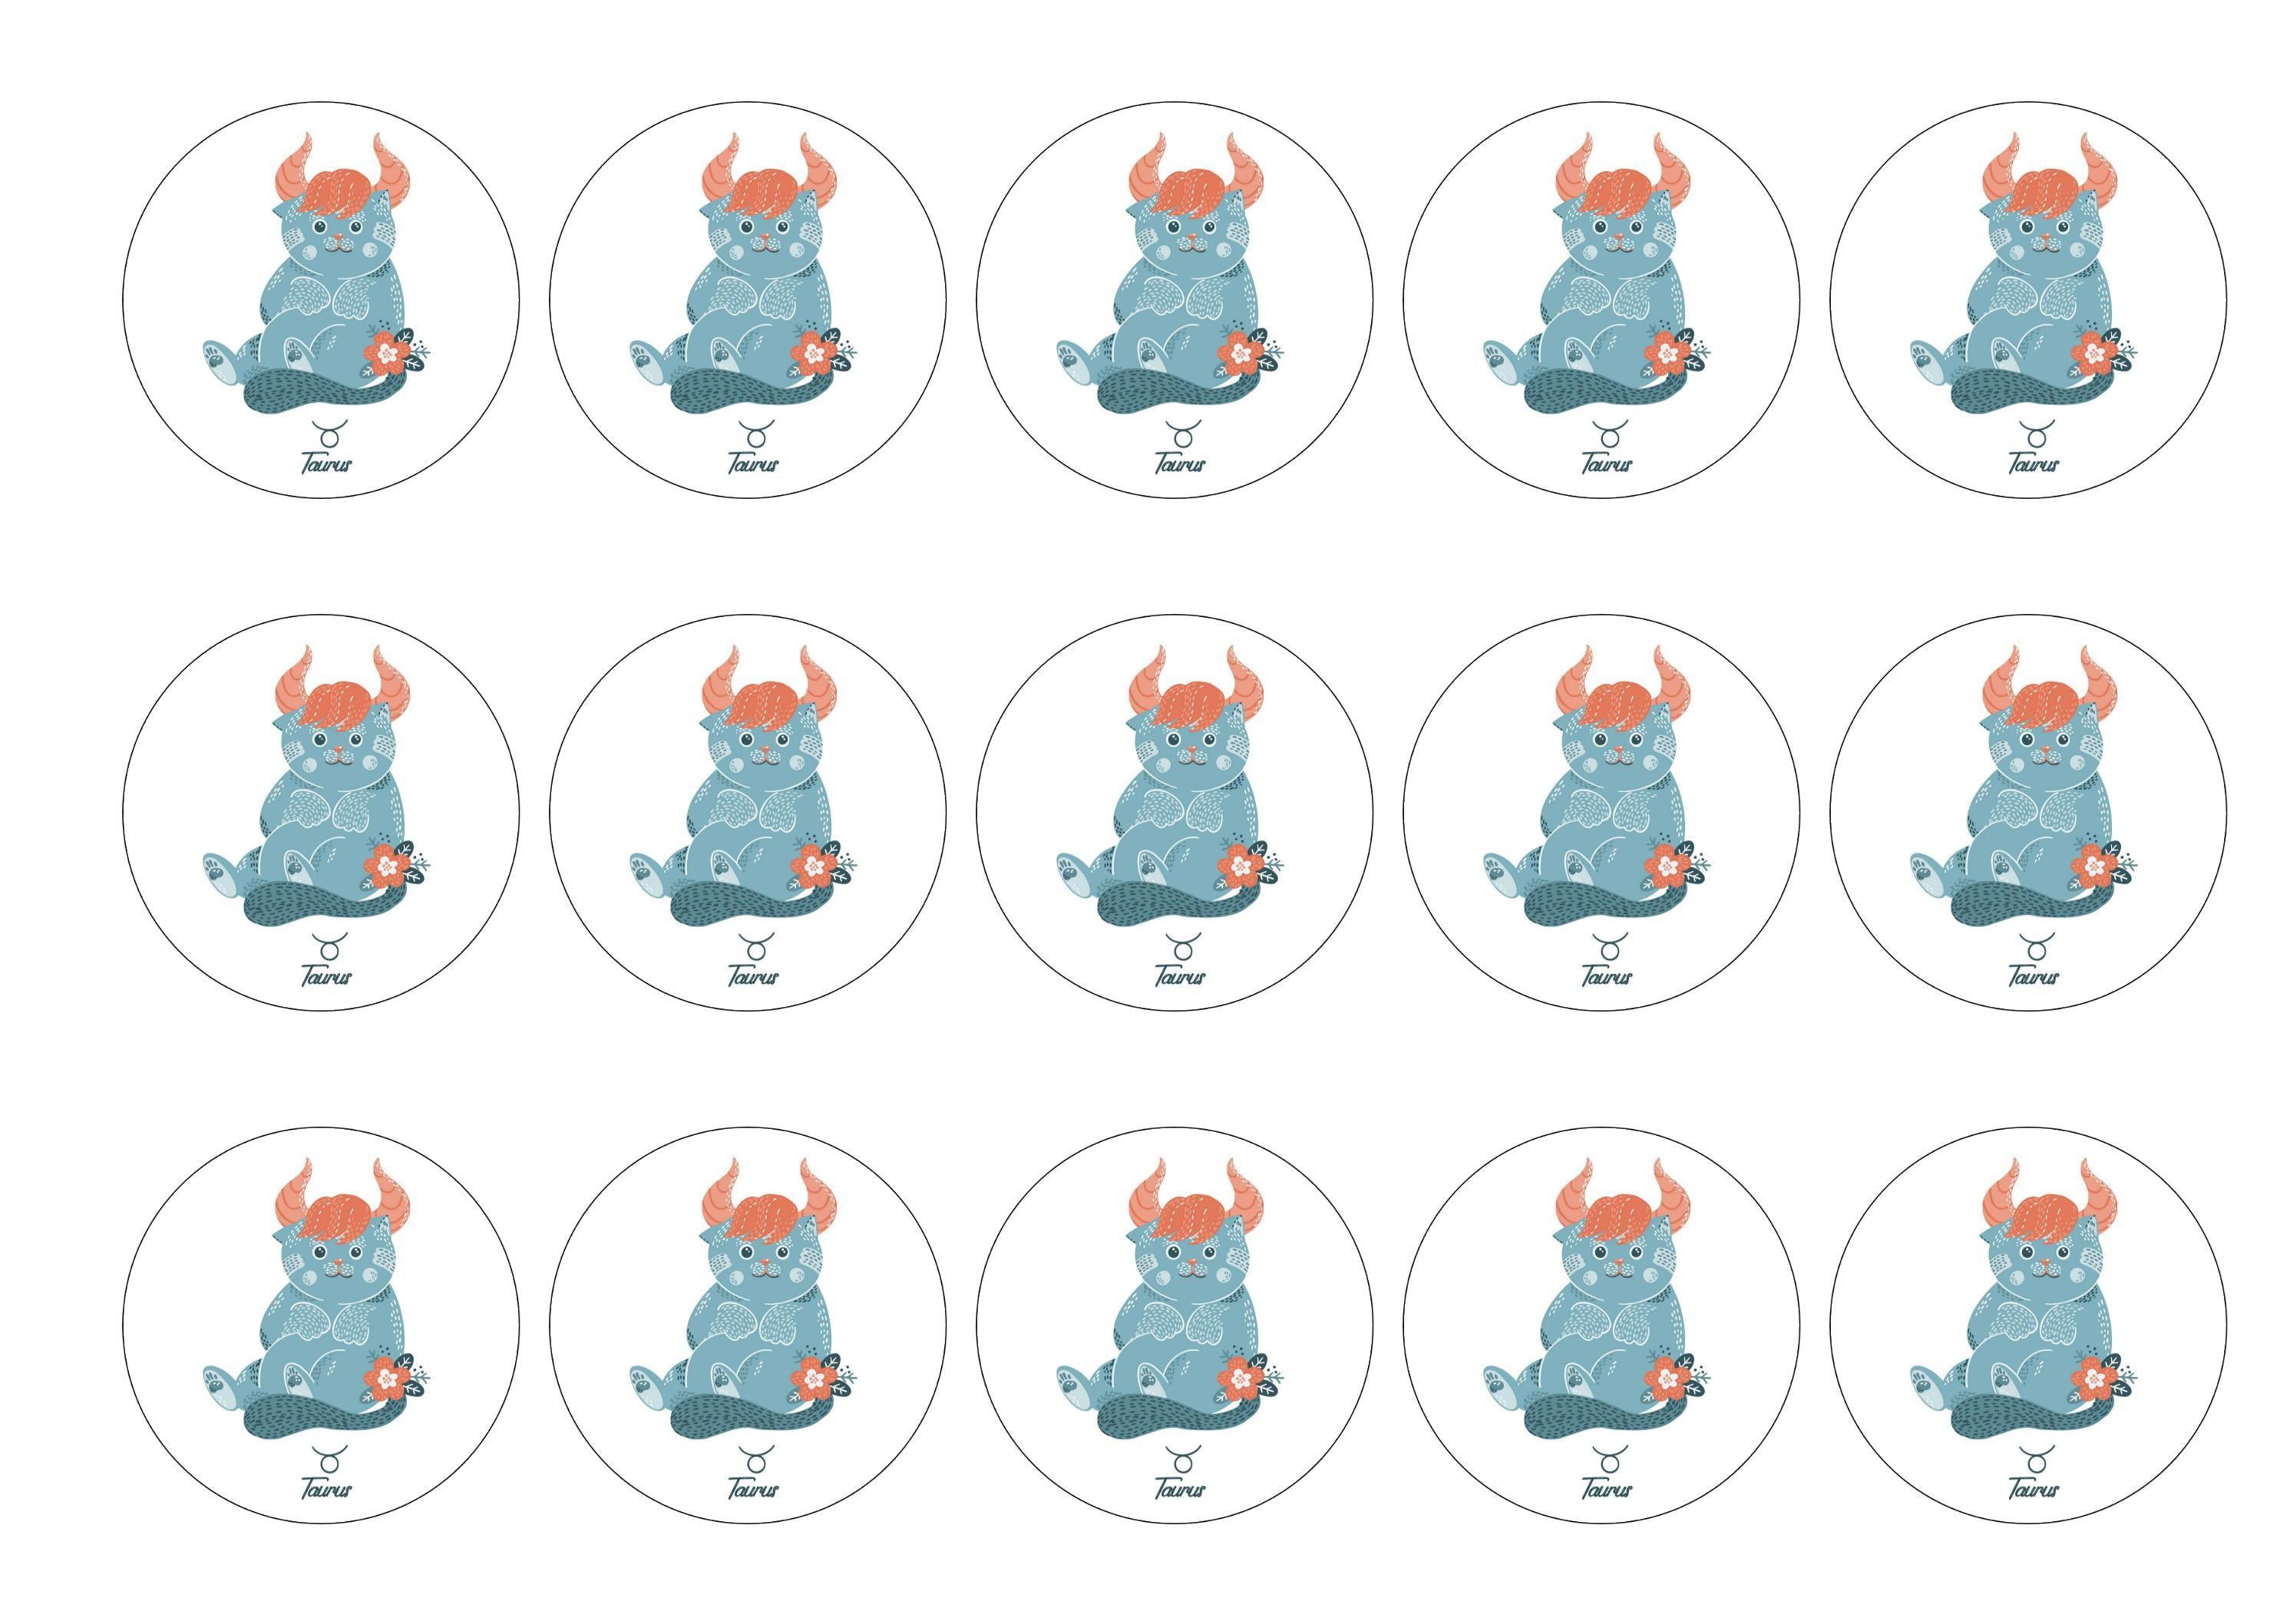 15 printed cupcake toppers with cute cats symbolising Taurus the Bull Star Sign